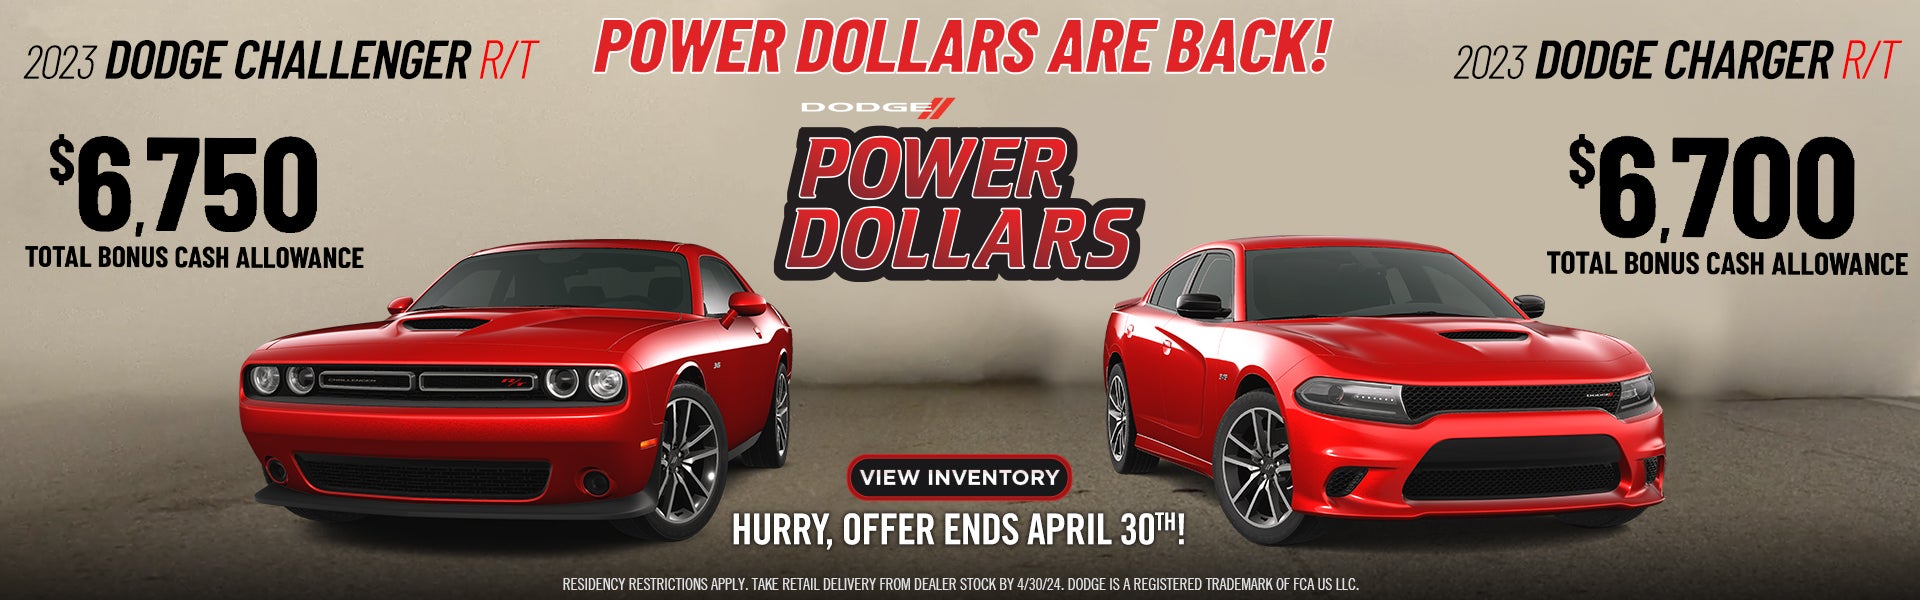 Power Dollars Are Back